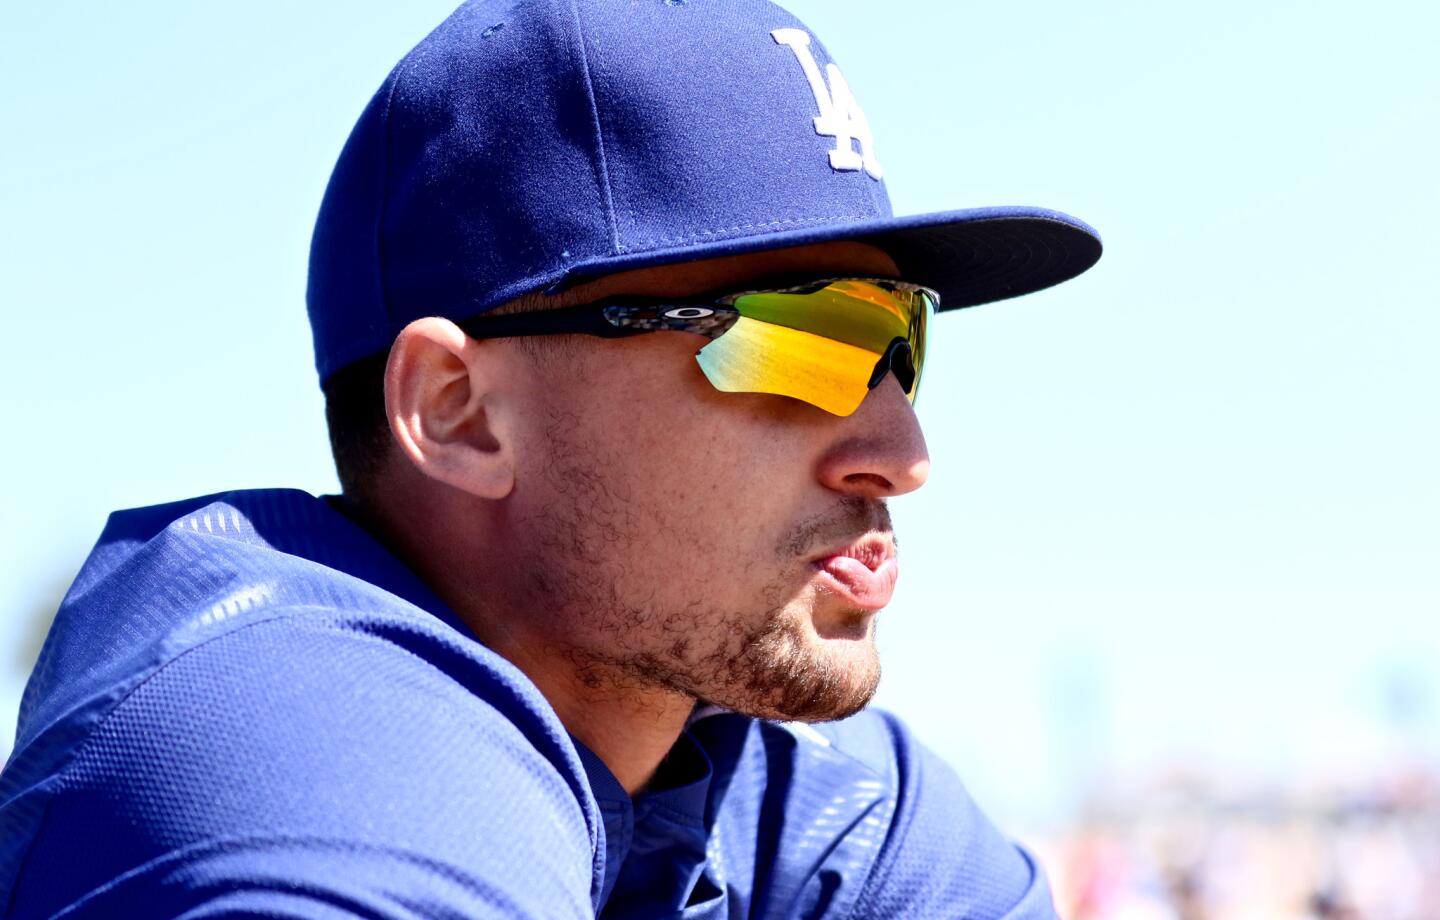 Dodgers outfielder Trayce Thompson looks on before a spring training game against the White Sox on Feb. 25.